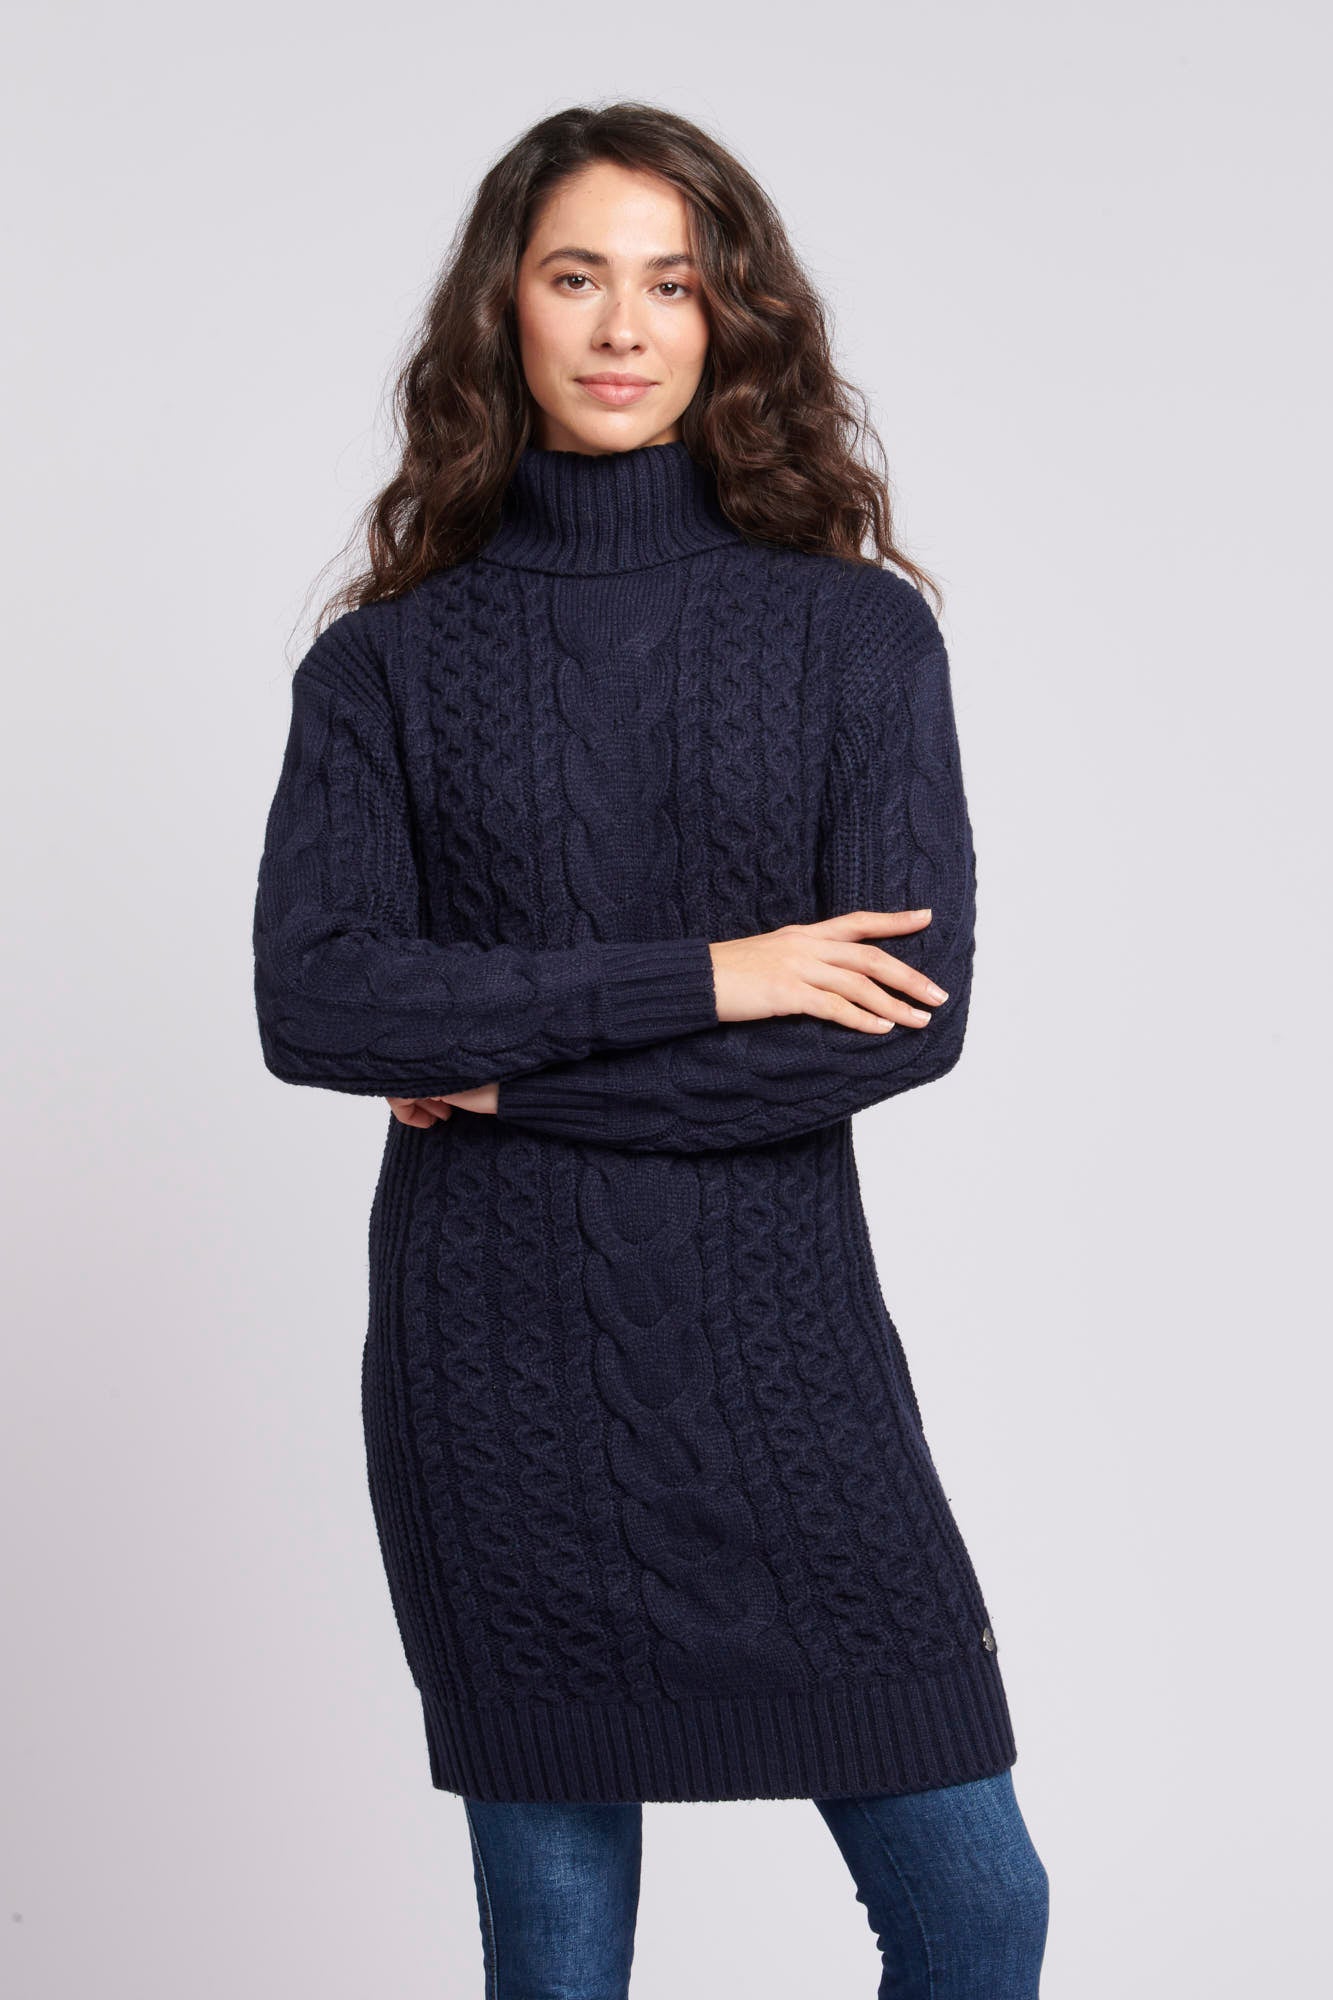 Womens Mixed Cable Knit Dress in Navy Blue